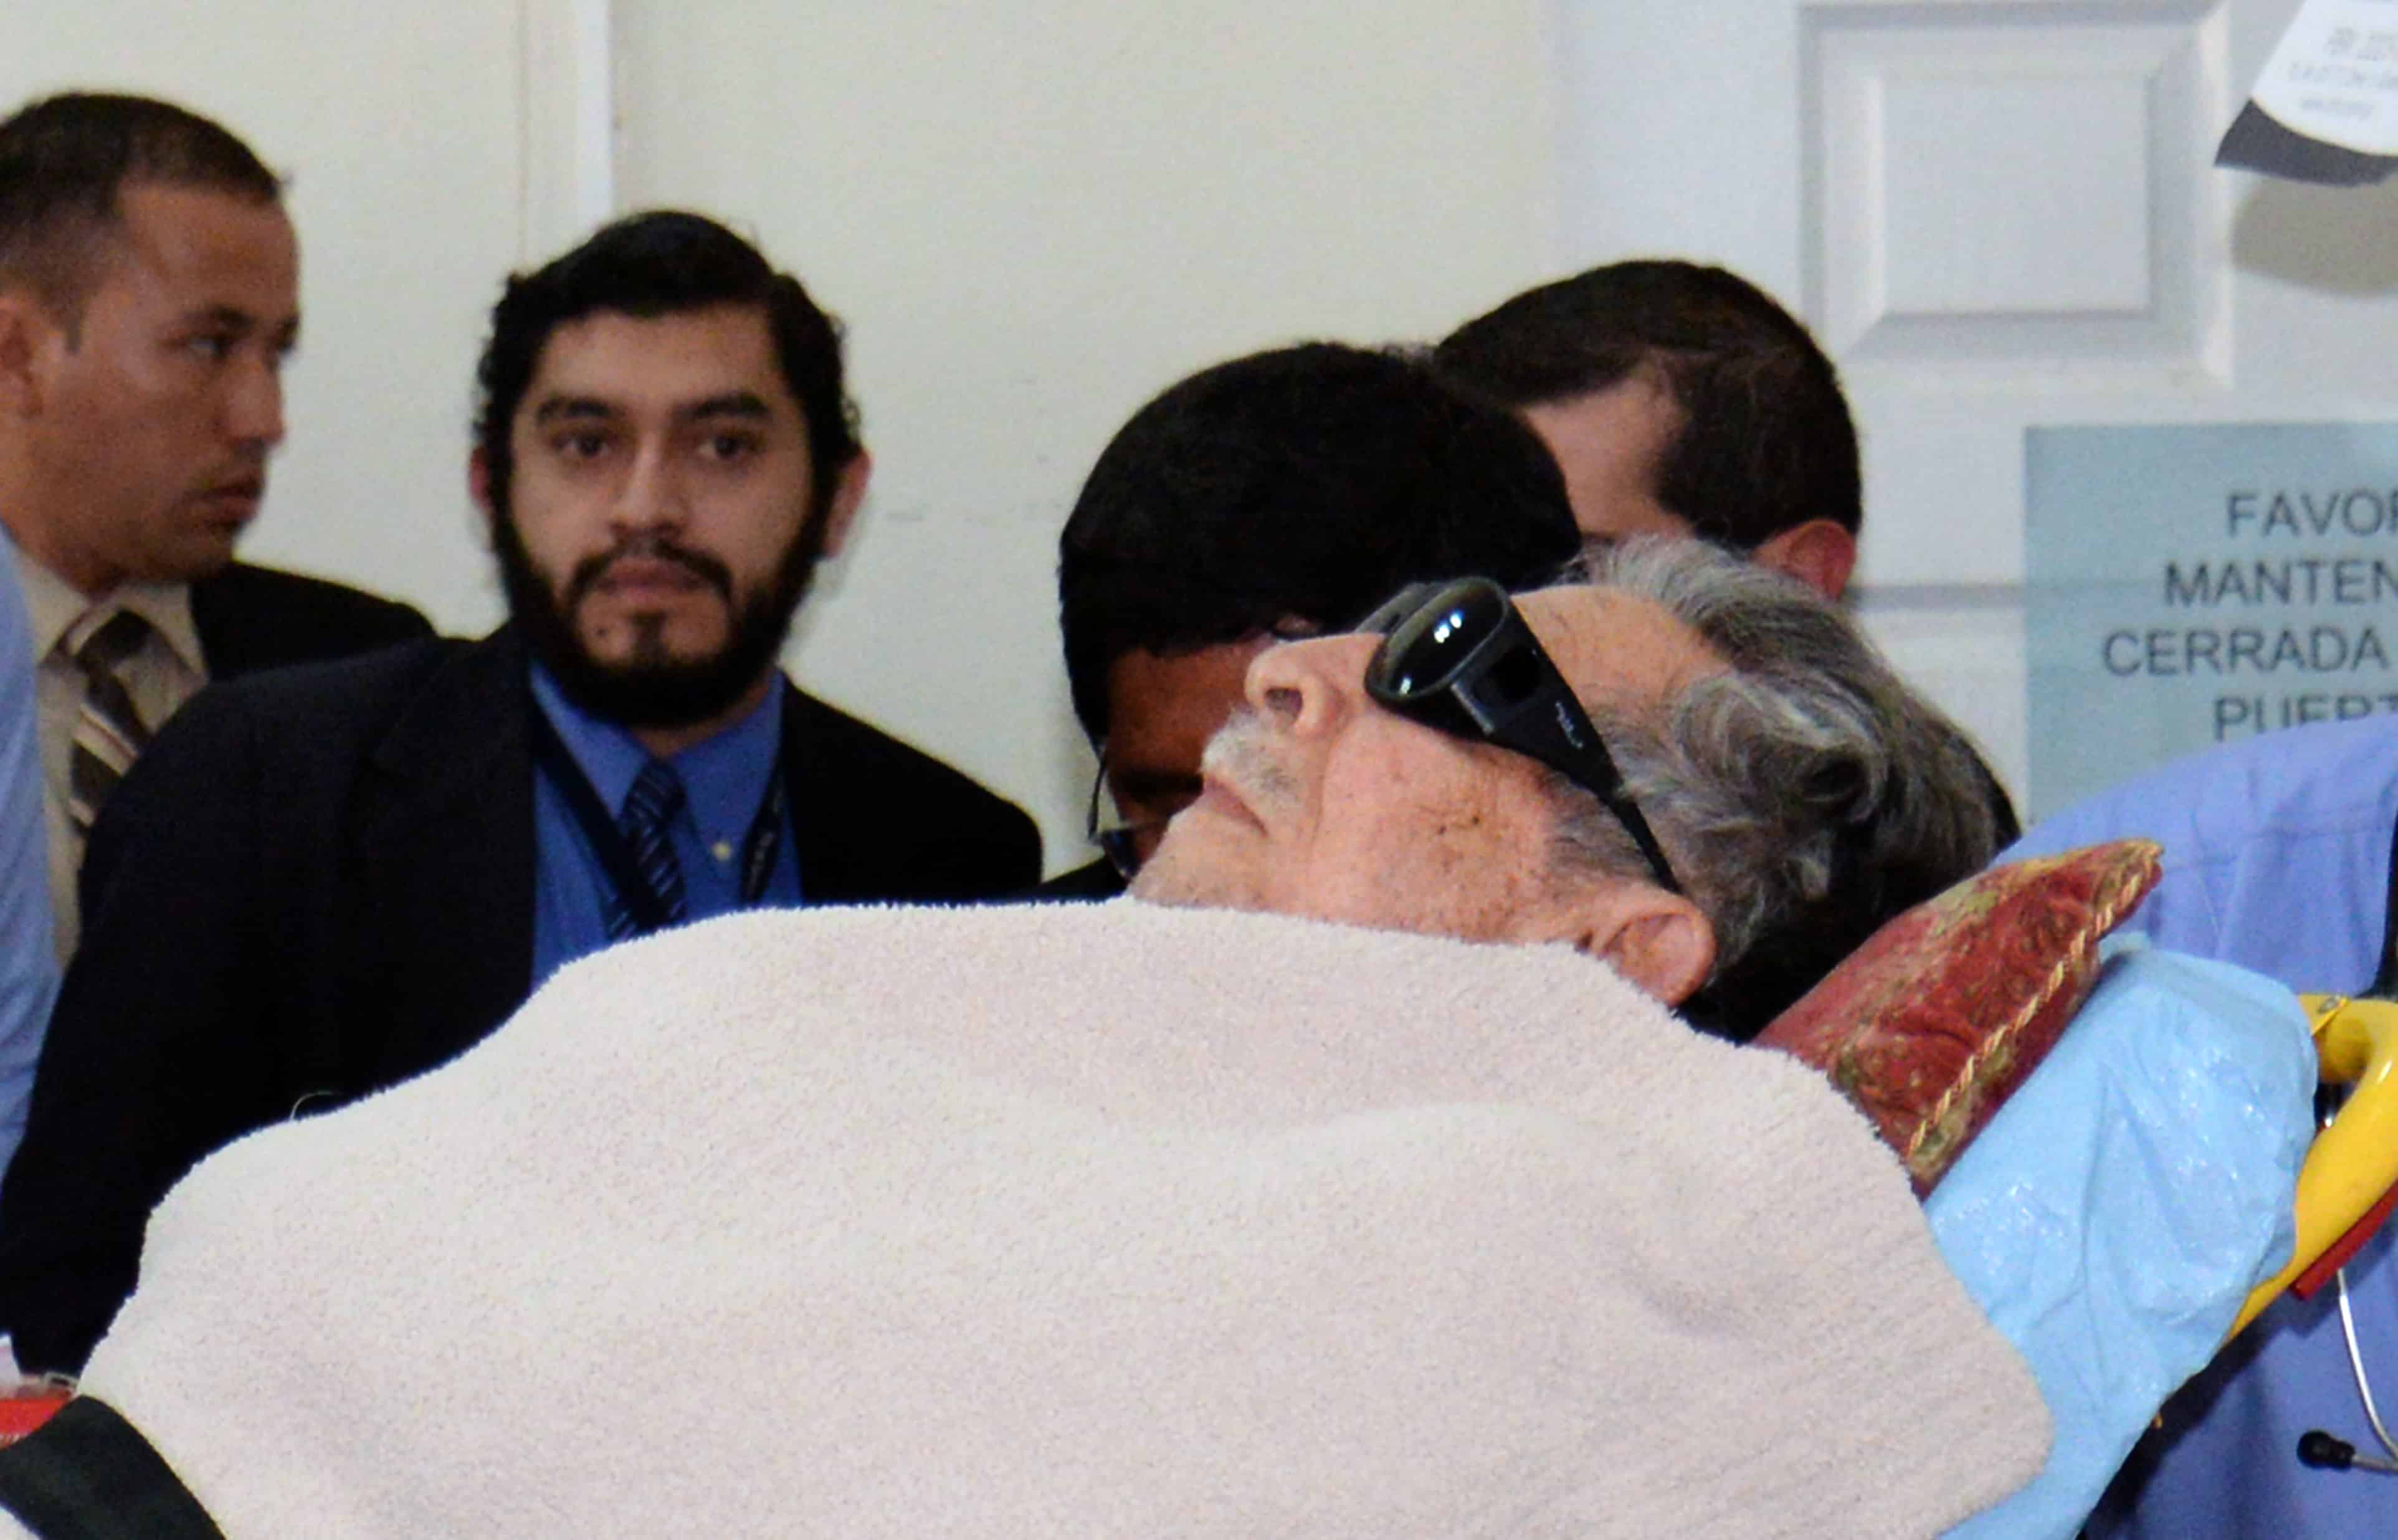 Former Guatemalan de facto president (1982-1983), retired General José Efraín Ríos Montt, arrives on a stretcher as a retrial against him opens in Guatemala City, on January 5, 2015.